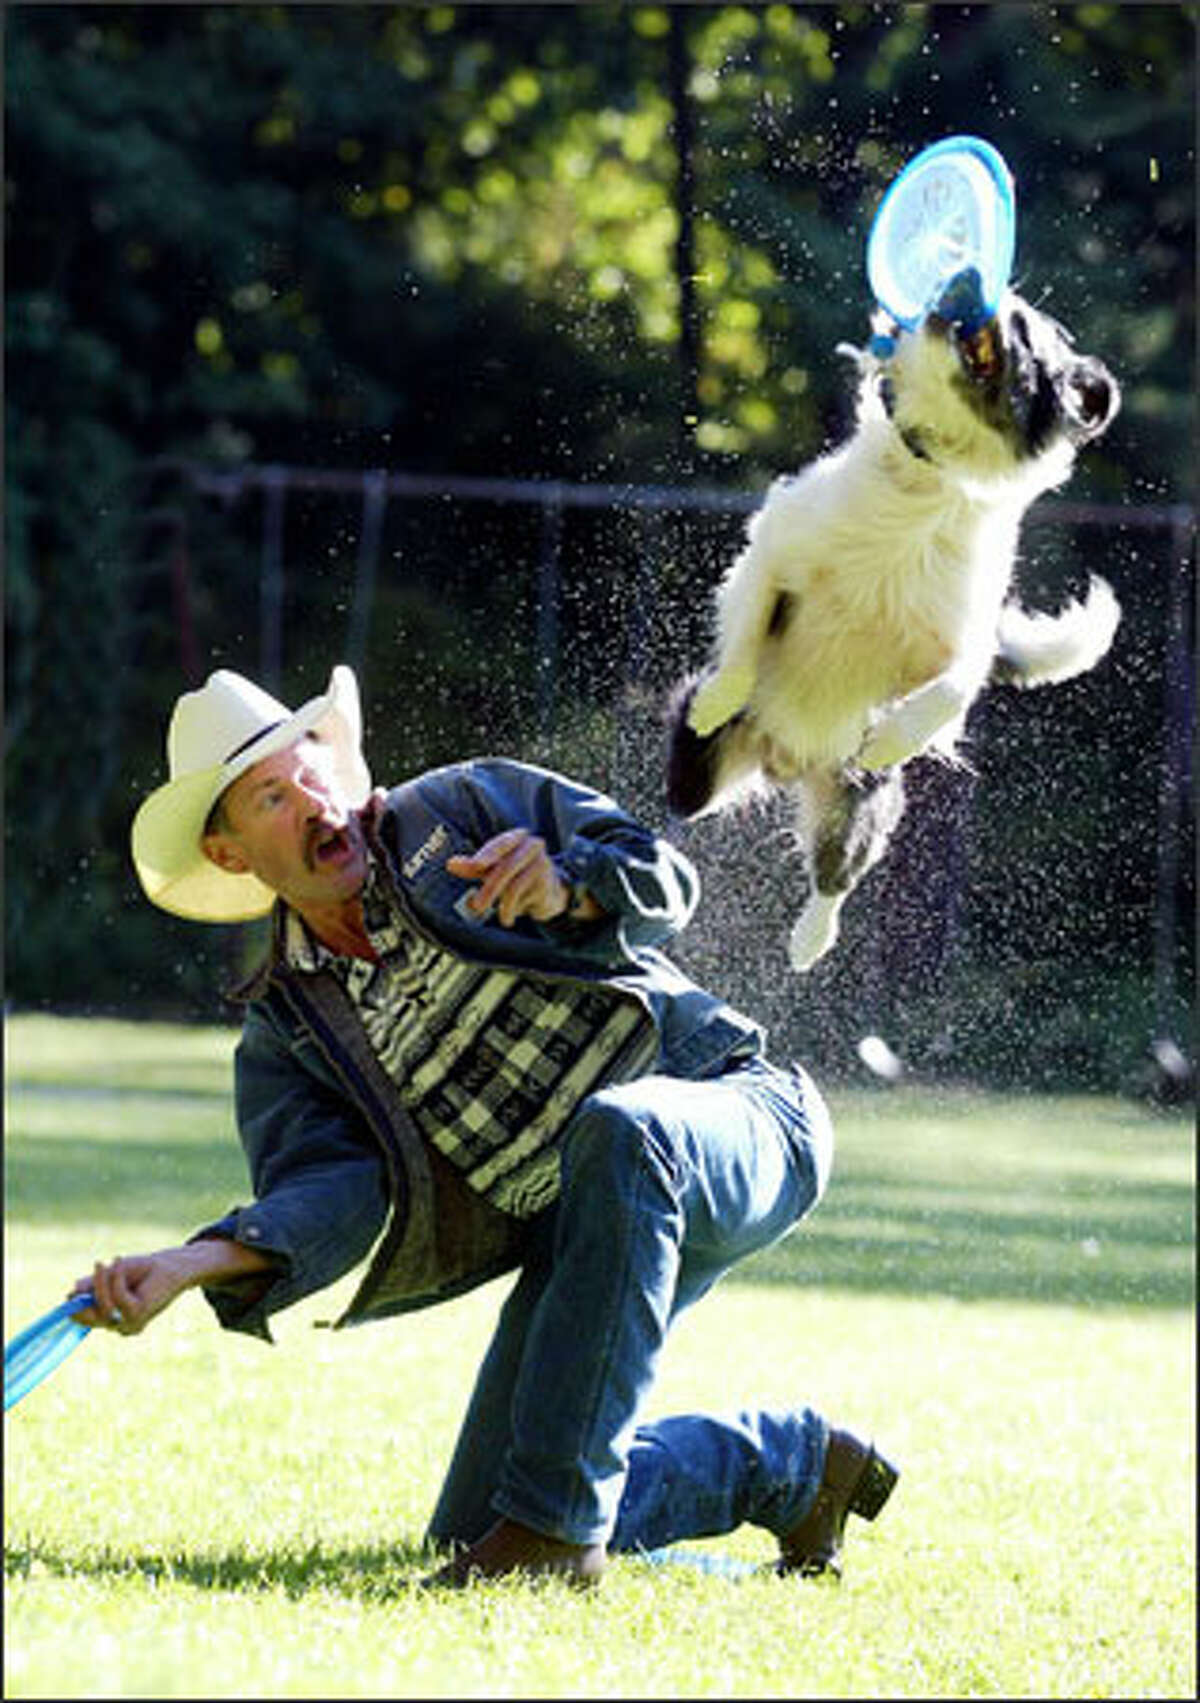 Ray Calhoun of Madrona works out with his border collie mix, Cordell. Calhoun, Cordell and Calhoun's other dog, Cowboy, are all headed to the world canine disc championships in Atlanta this weekend. (Editor's Note: Calhoun was incorrectly identified in the original version of this caption.)